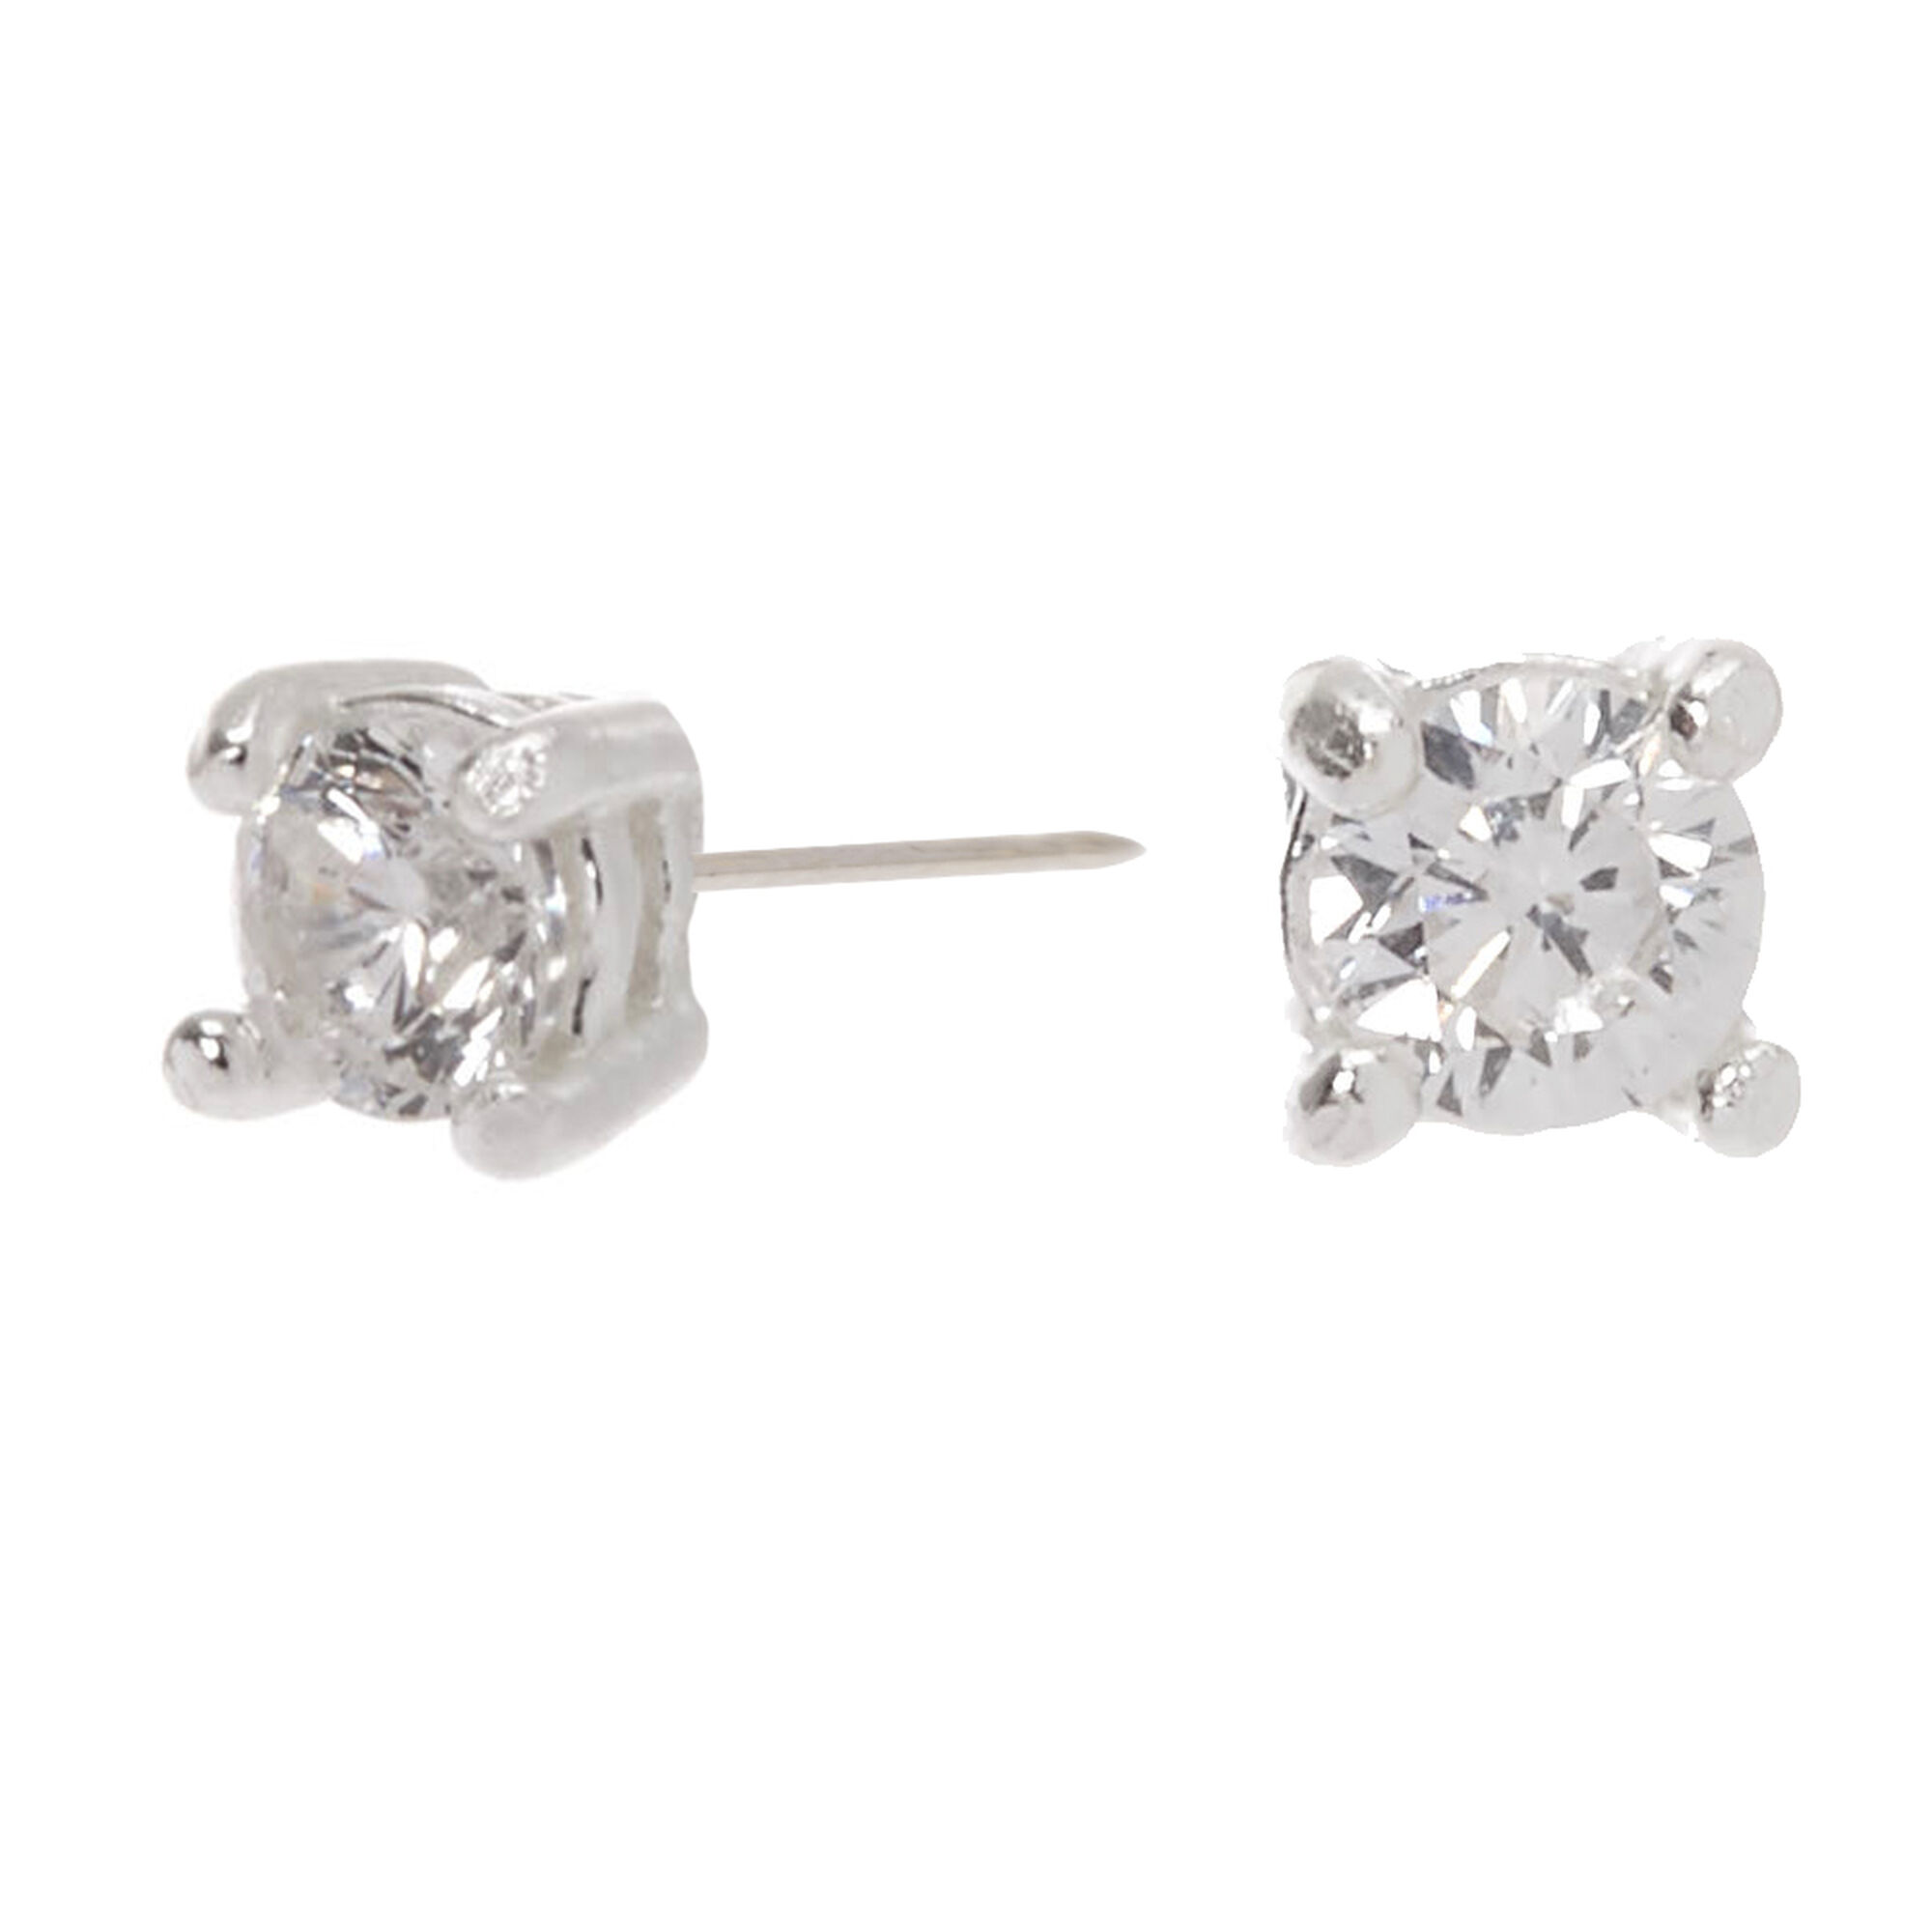 Sterling Silver Cubic Zirconia 2MM Round Stud Earrings | Icing US